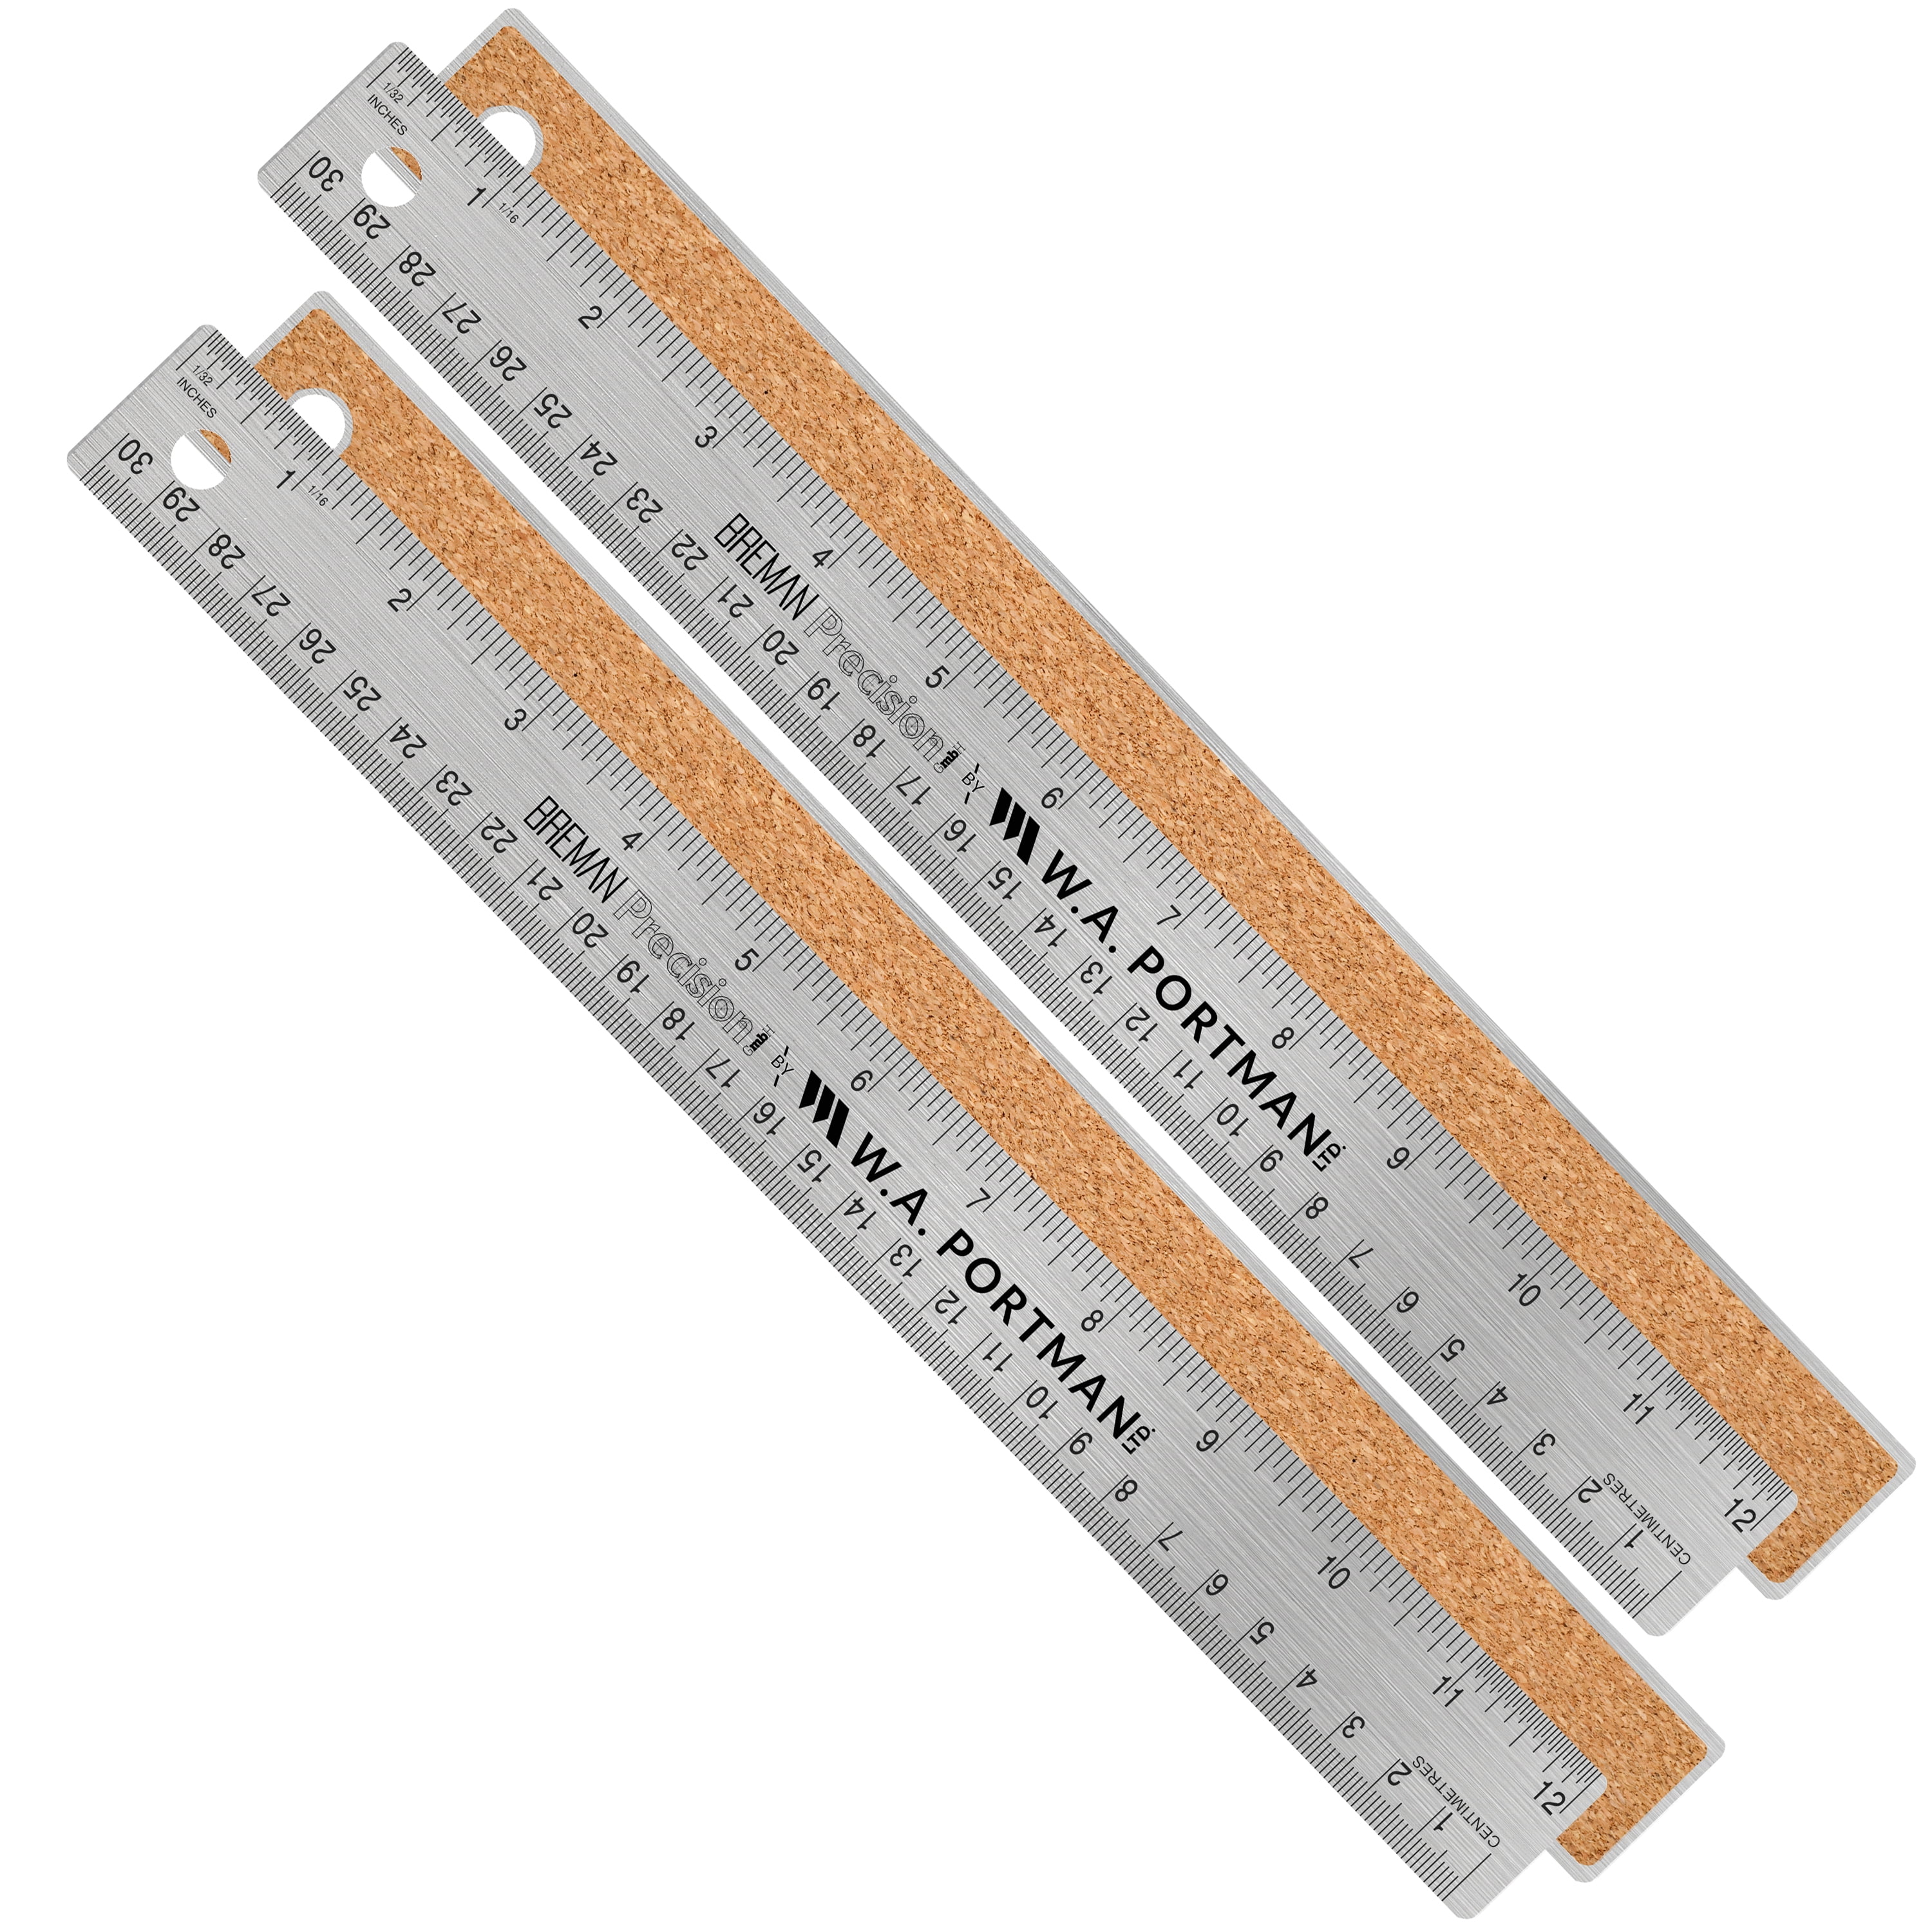 2 SCALE 12 INCH WOODEN RULER gl004 – Simon Says Stamp